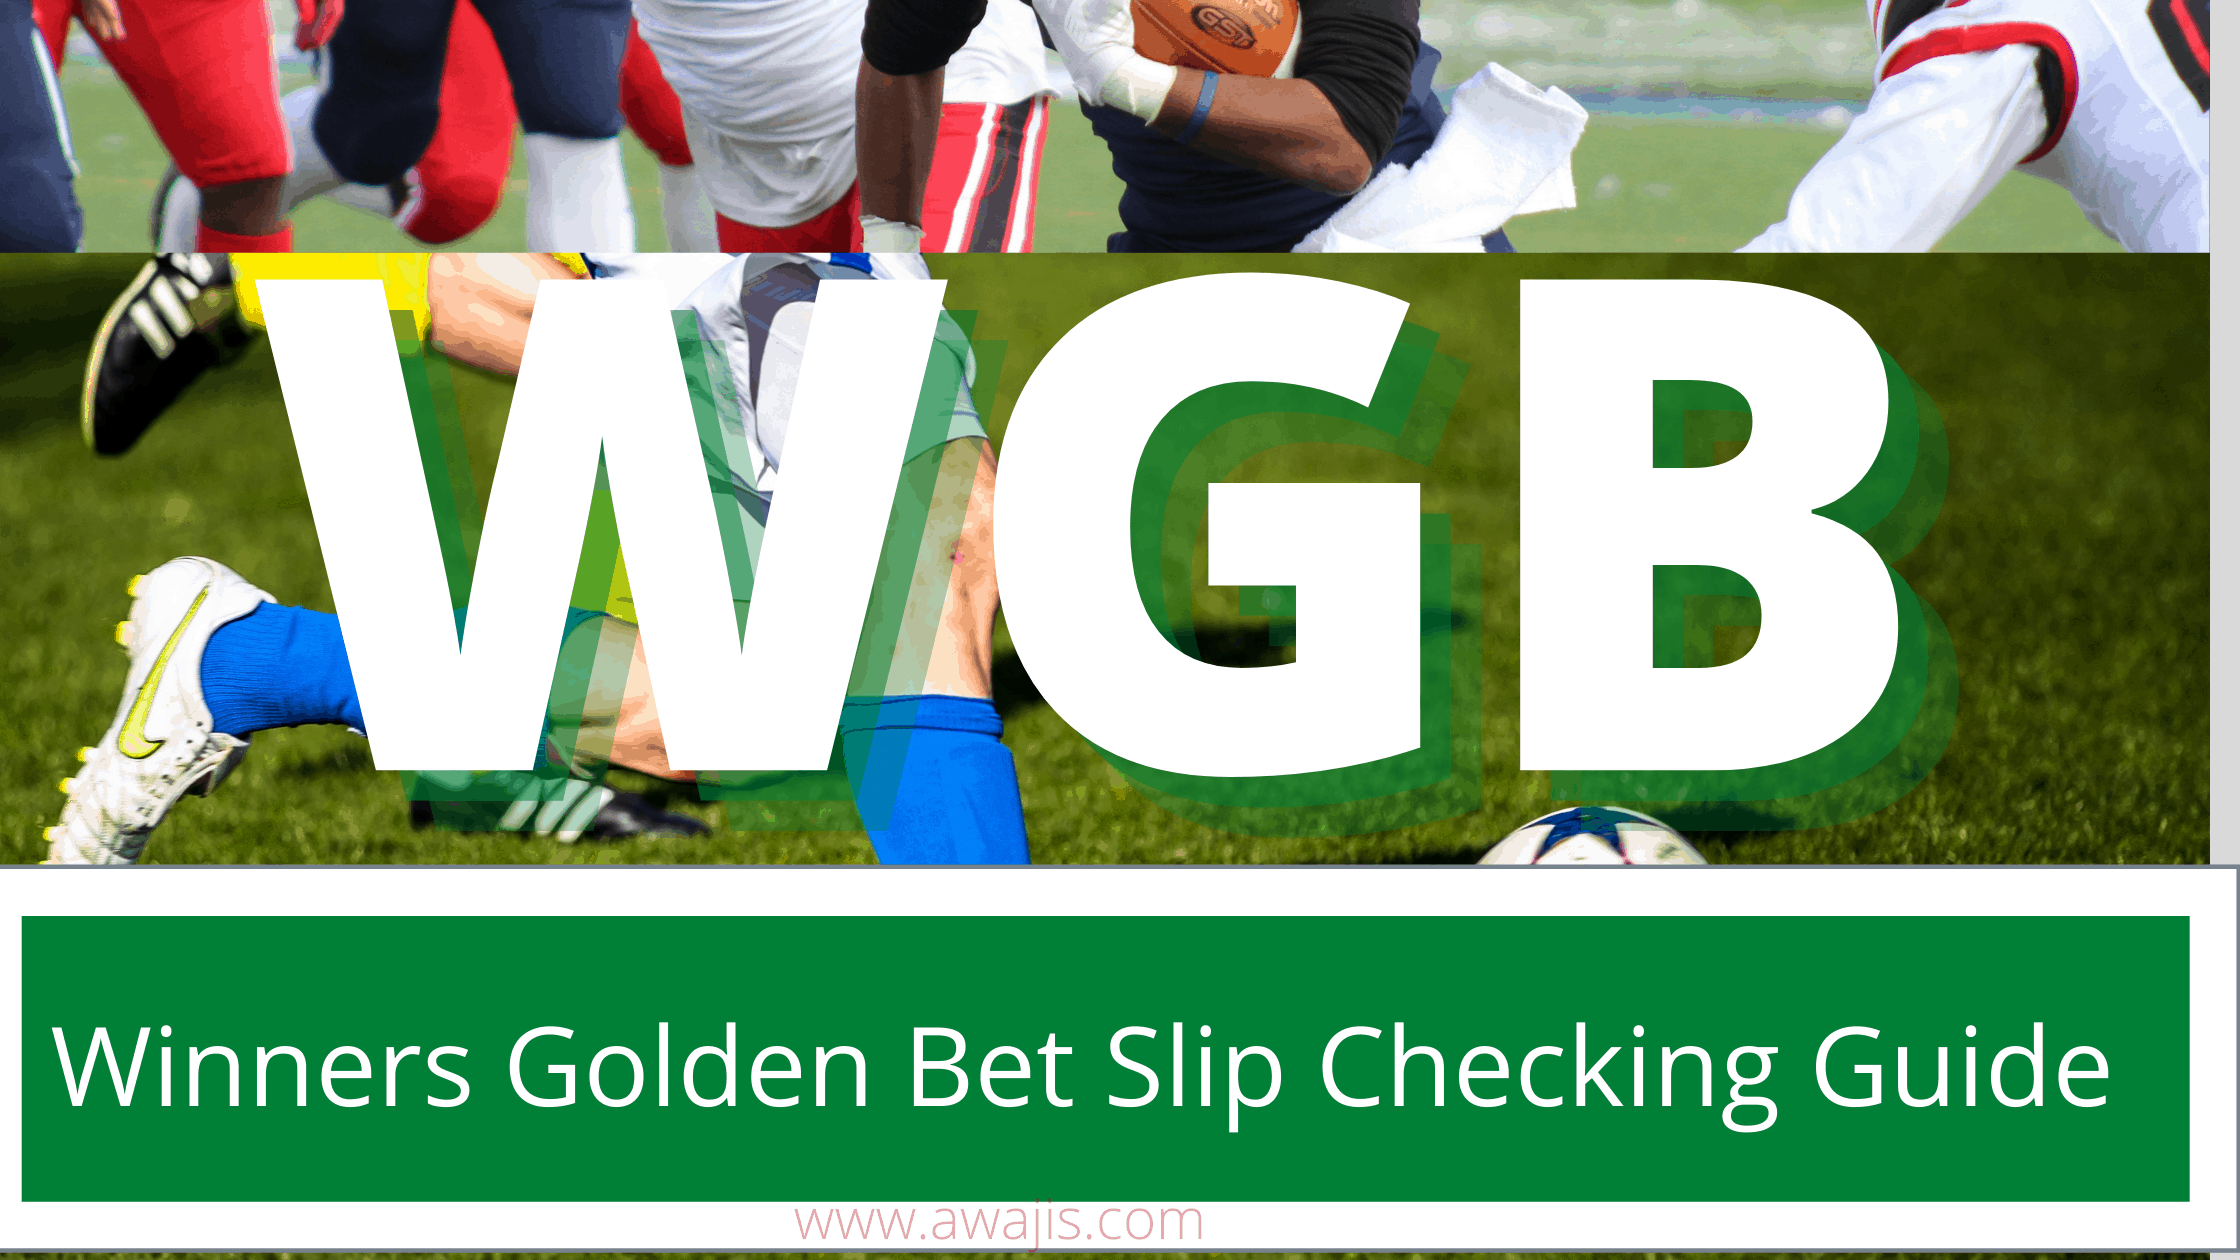 How To Check Bet Slip On Winners Golden Bet [BetWGB]